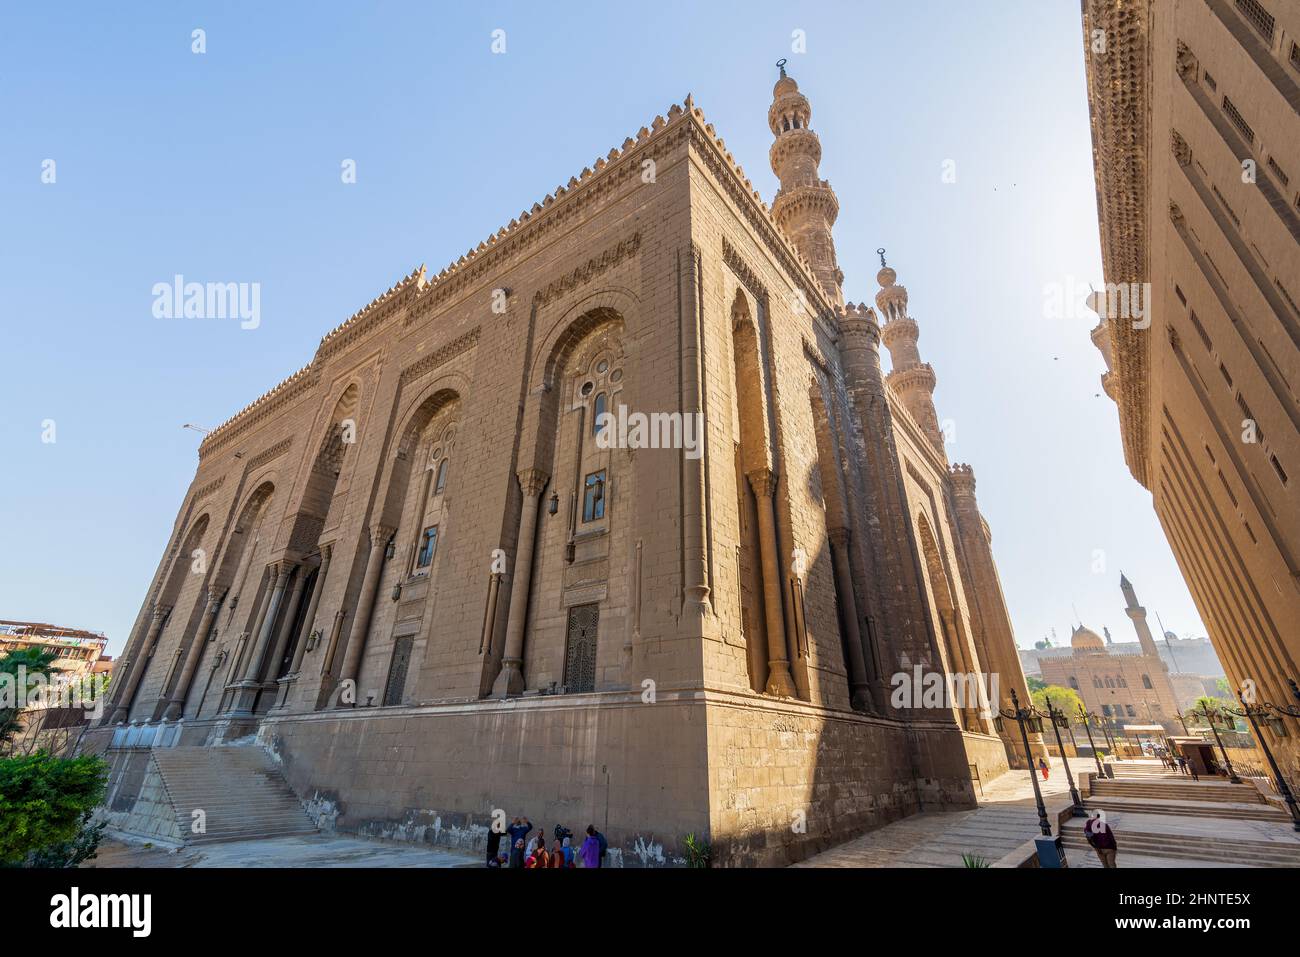 Facade of Royal era Mosque of Al Rifai, with side view of Mamluk era Mosque and Madrassa of Sultan Hassan, Cairo, Egypt Stock Photo